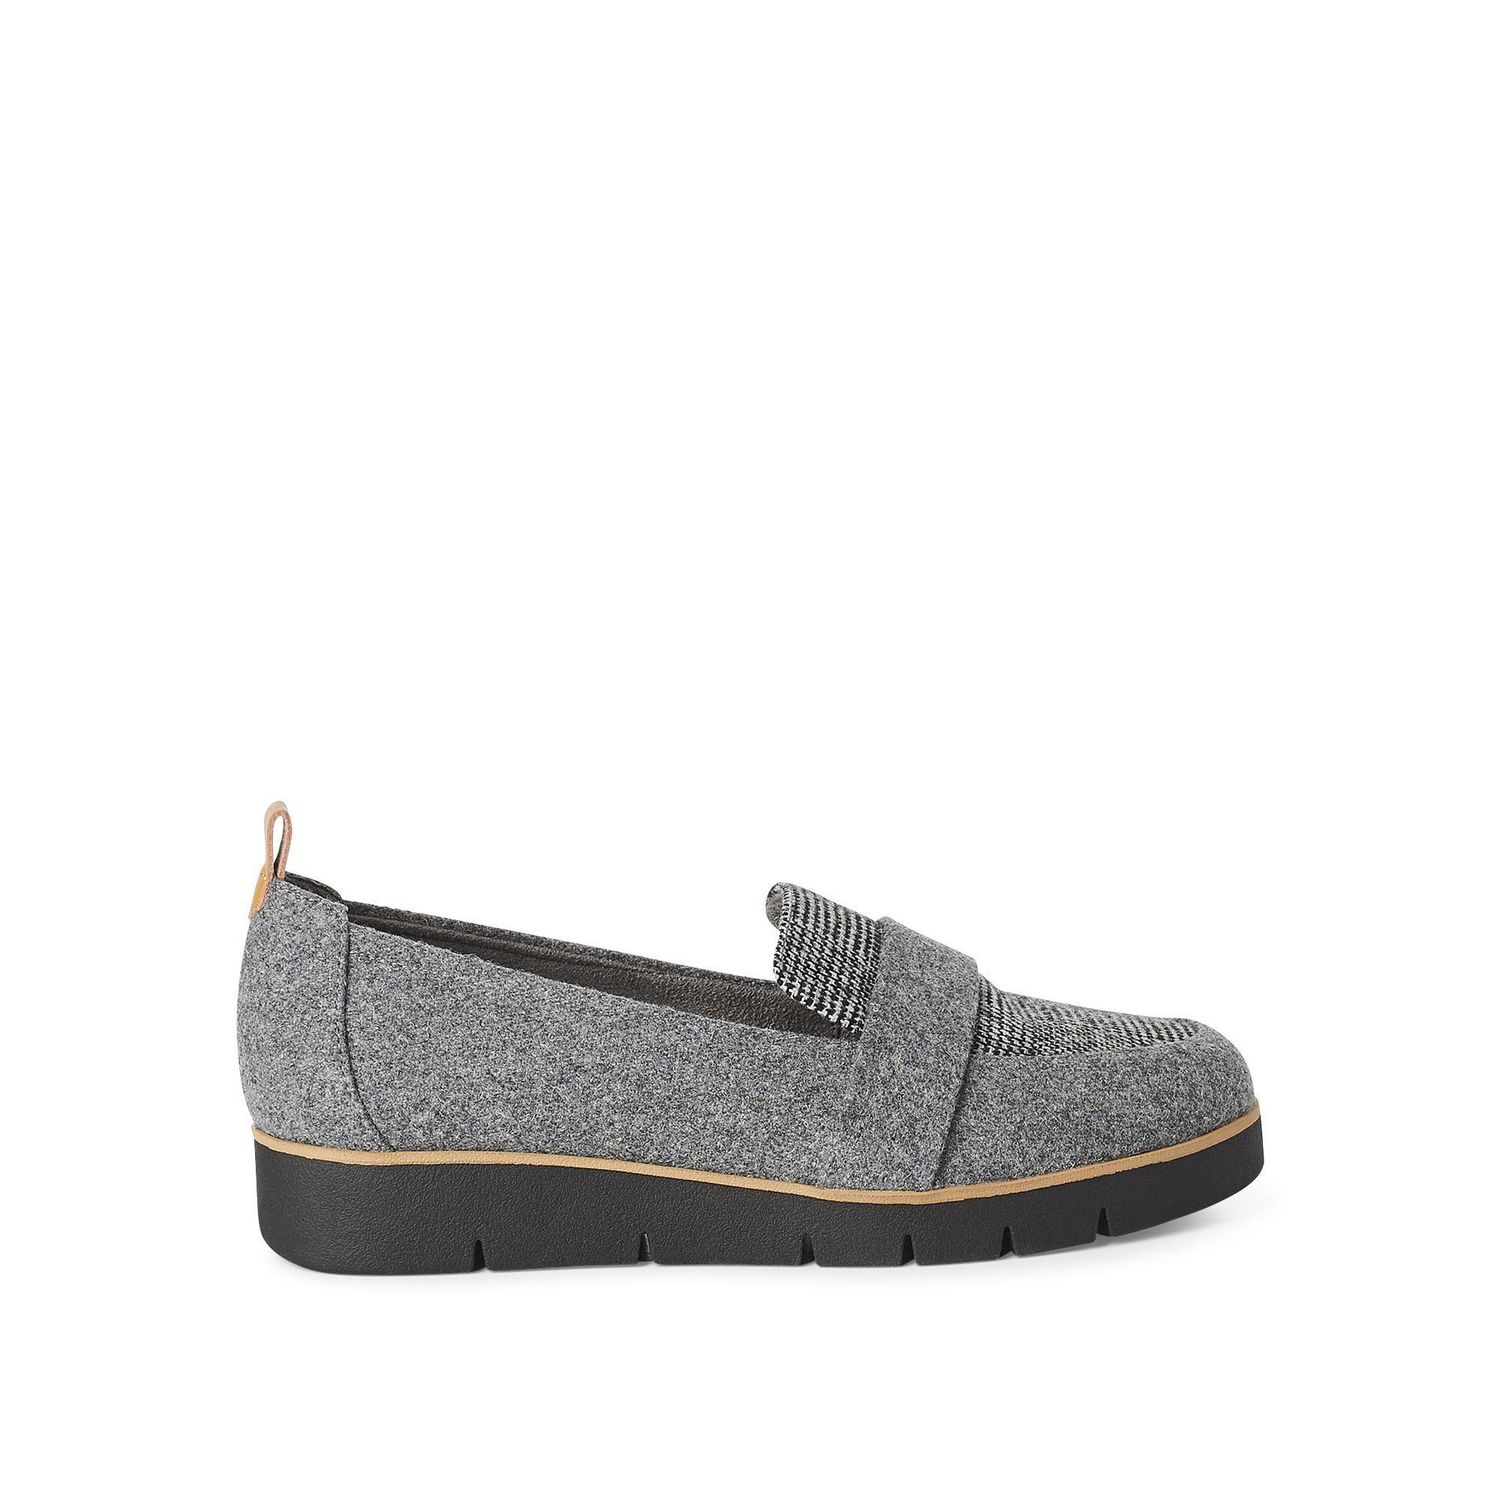 Dr. Scholl's Women's Wing Wedge Loafers | Walmart Canada